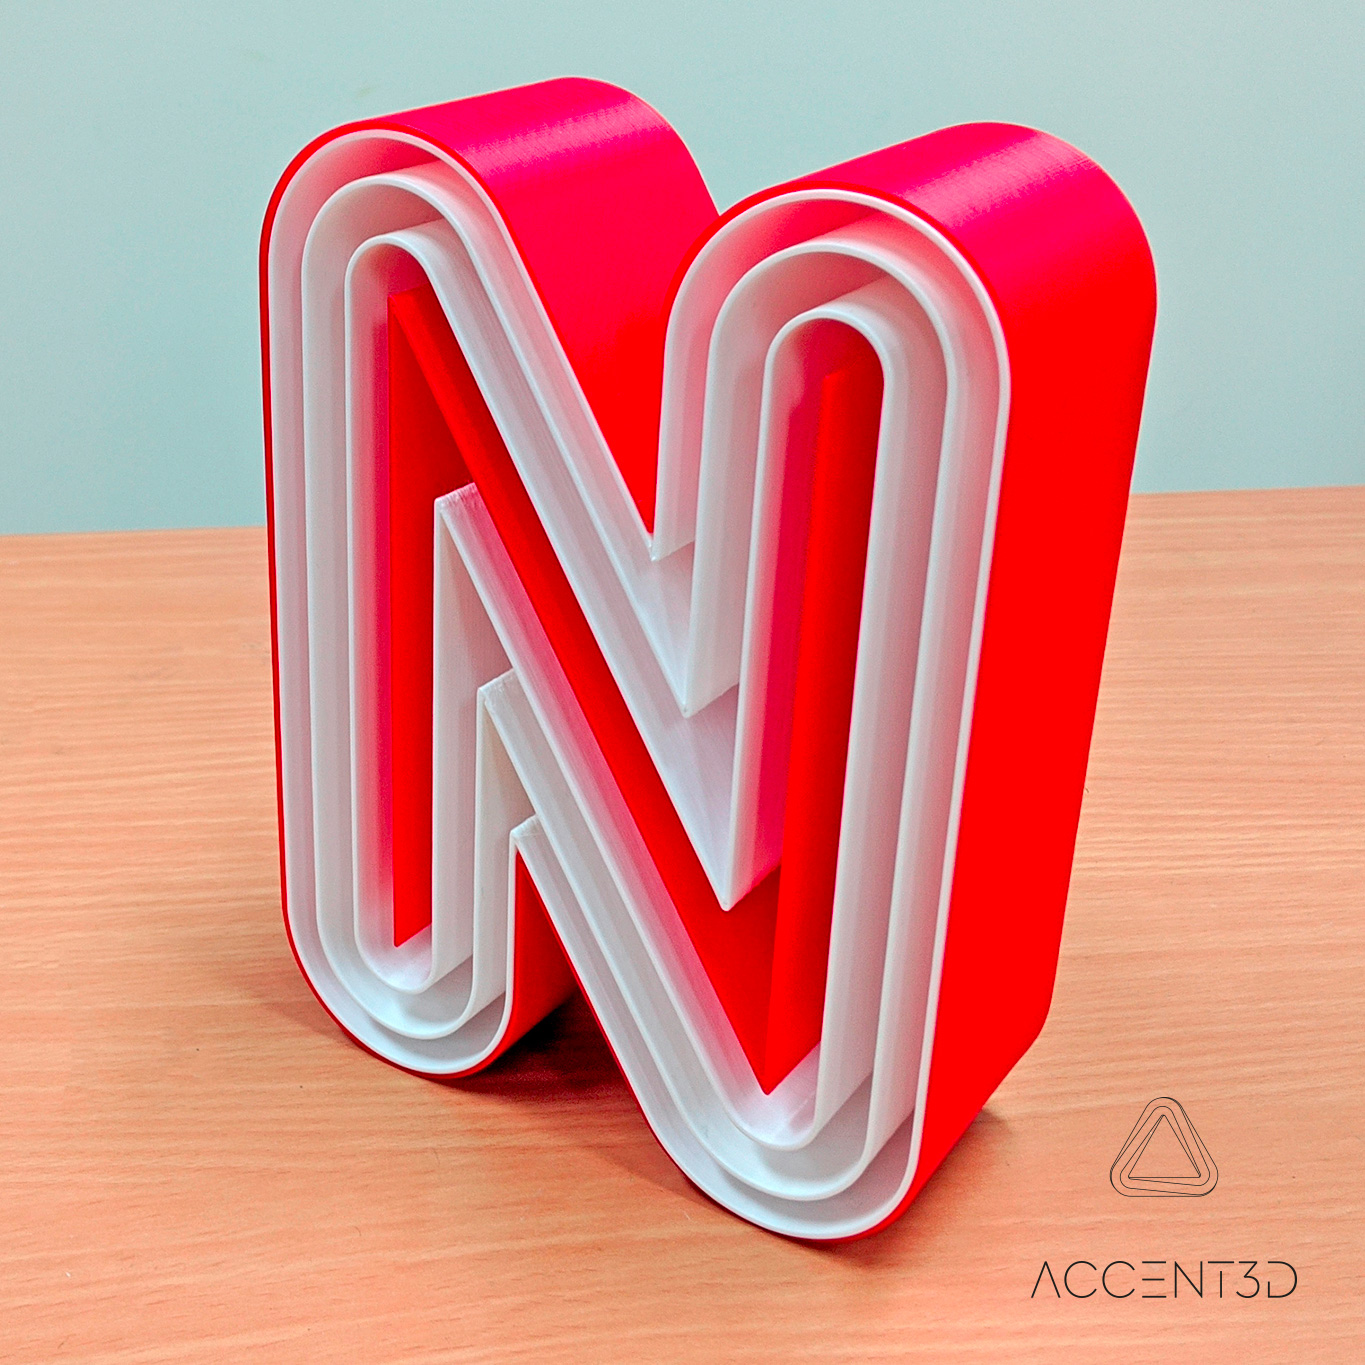 3D Printed Signage Letters